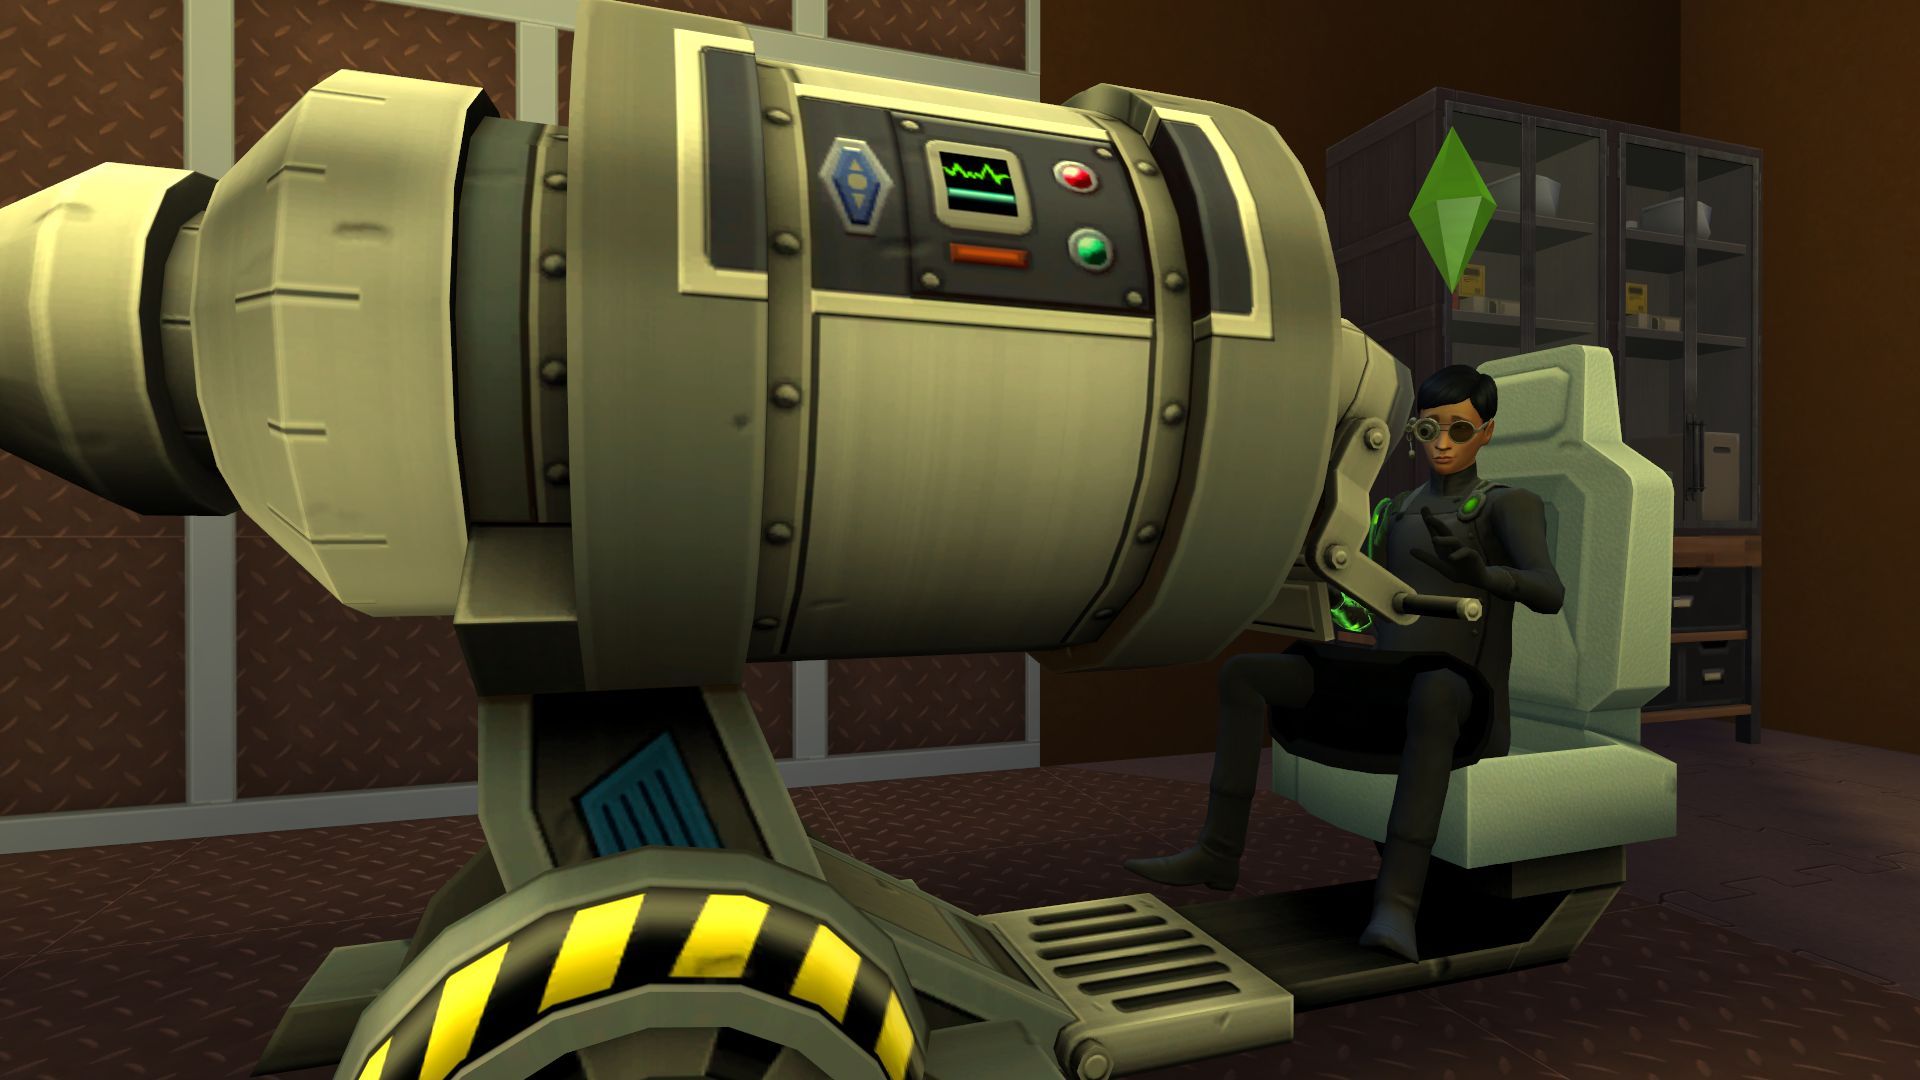 A Sims 4 Sim using the giant microscope while wearing the top-of-career science outfit.